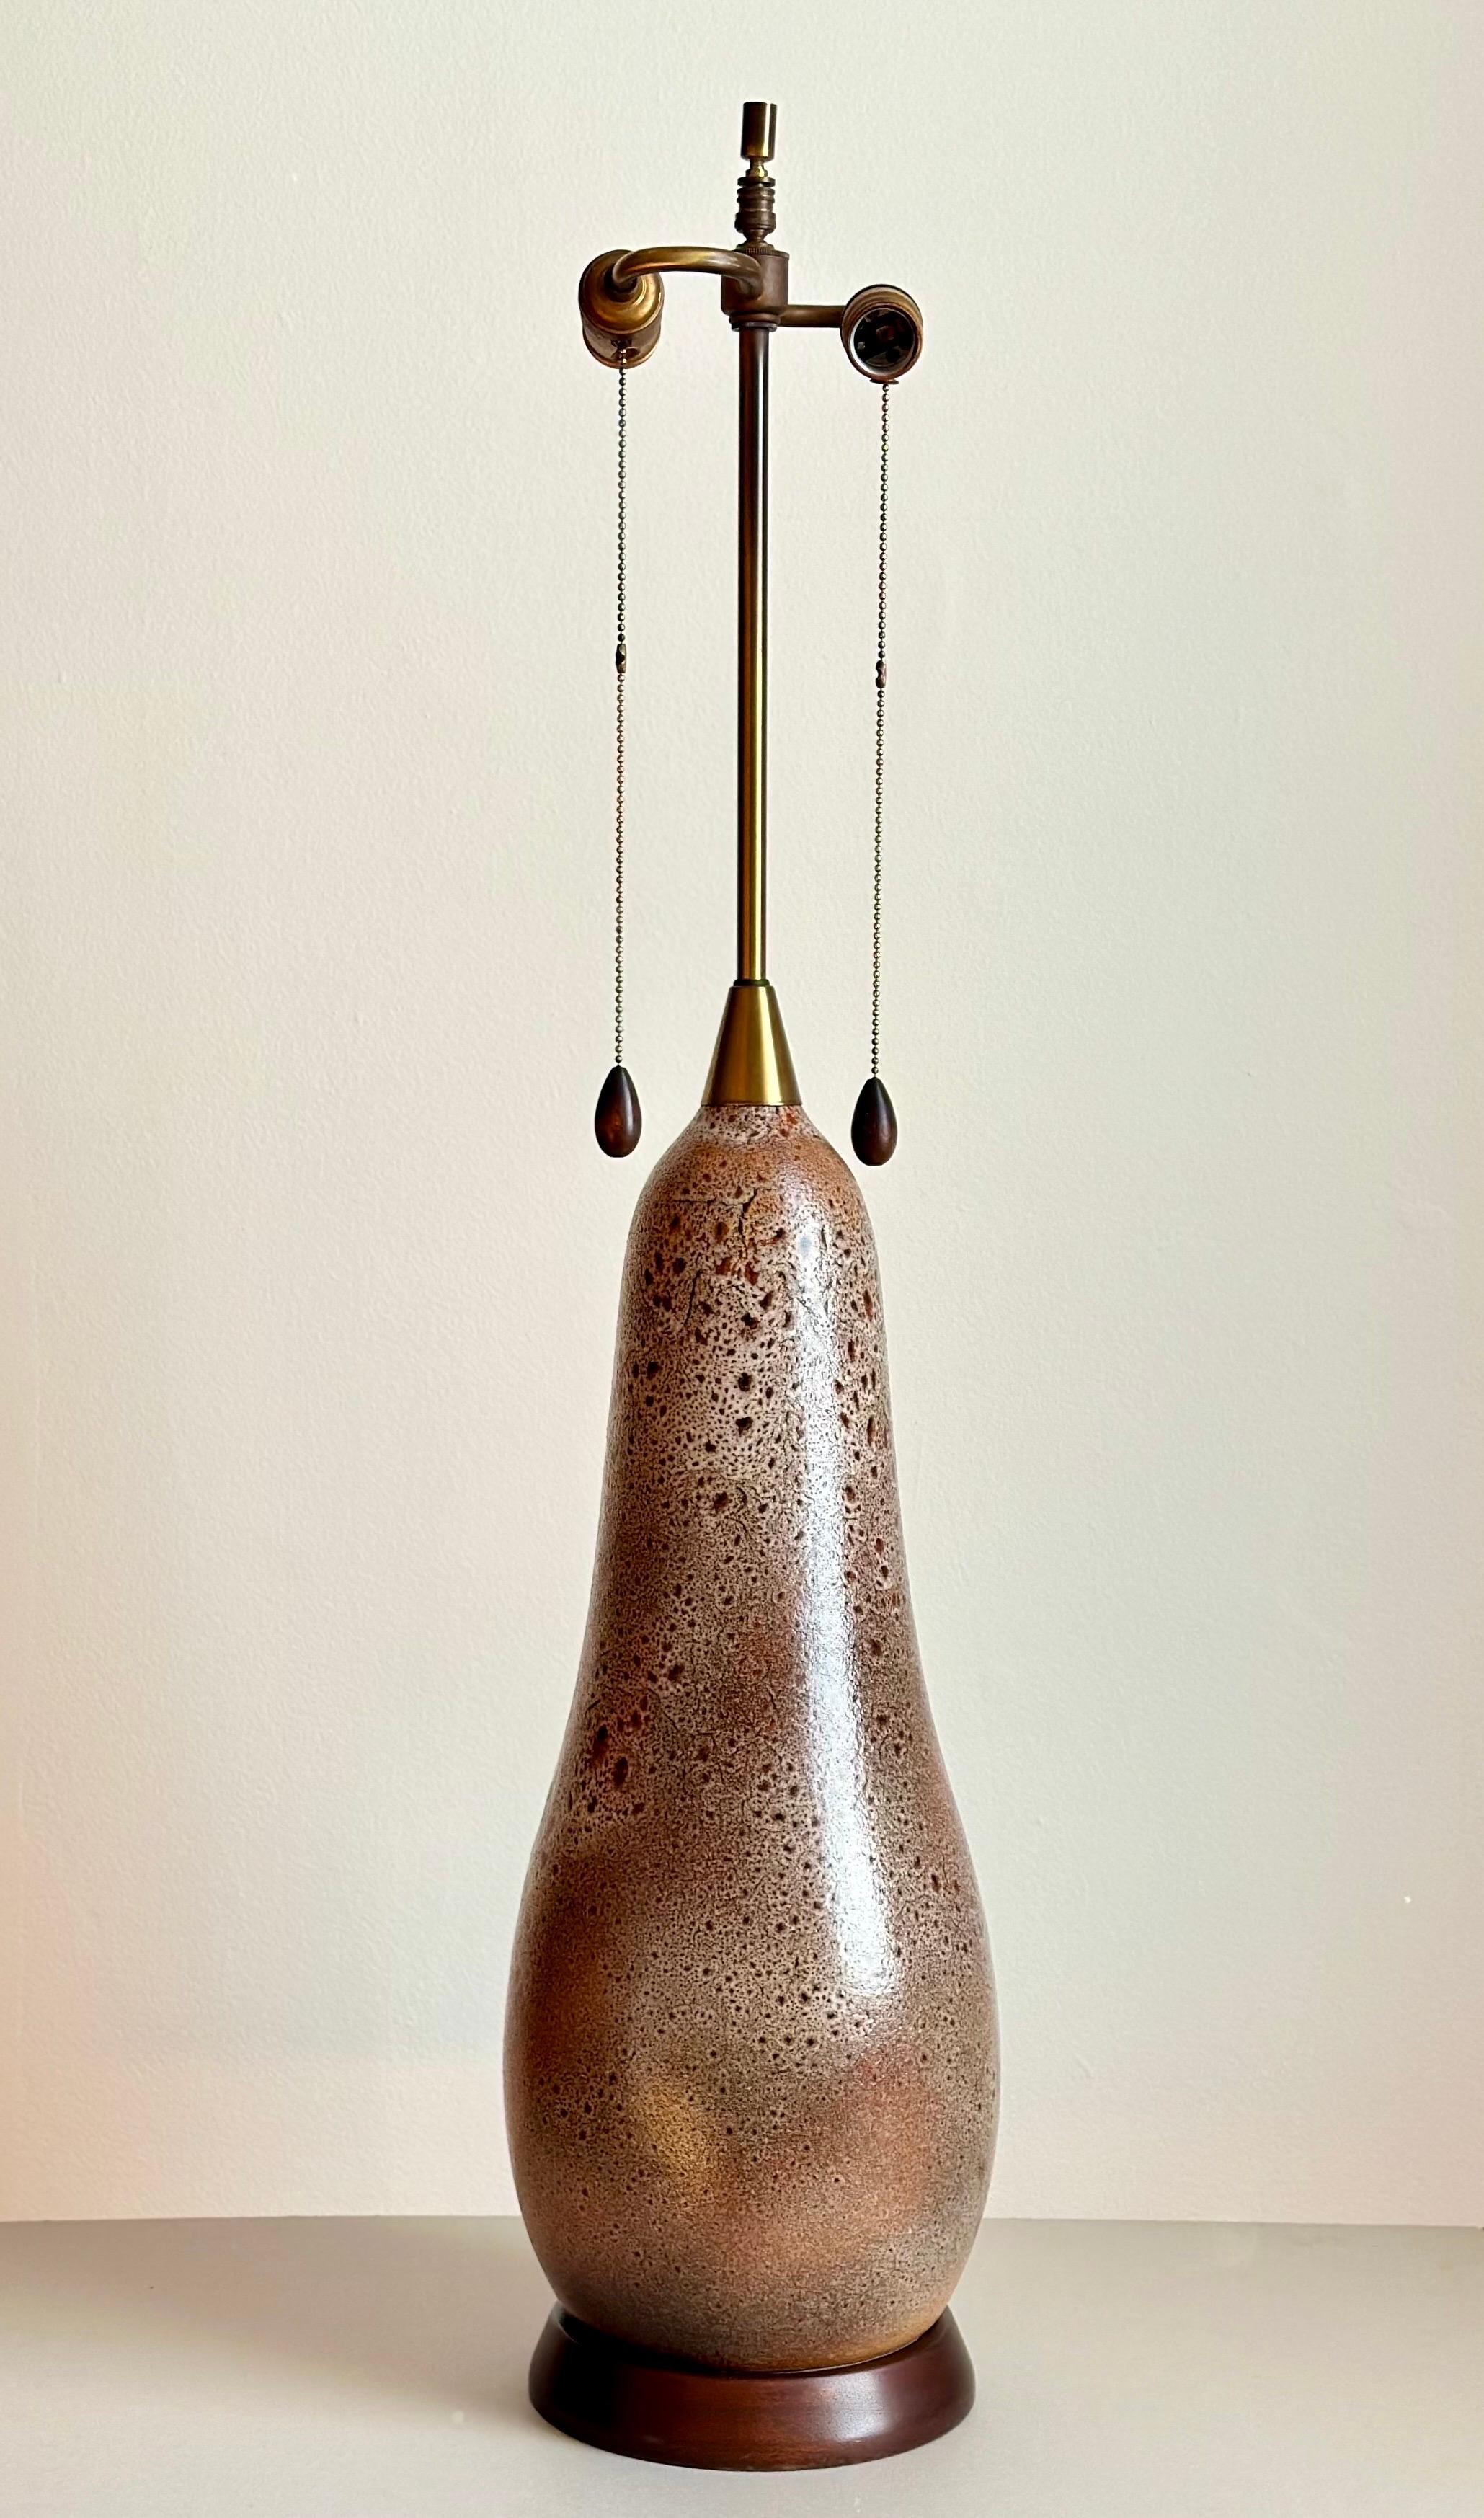 Large scale mid-century modern ceramic table lamp comprising a pear-shaped ceramic body finished with a salt glaze in muted earth tones, supported by a walnut base and with matching walnut switch pulls. A high quality lamp with its original